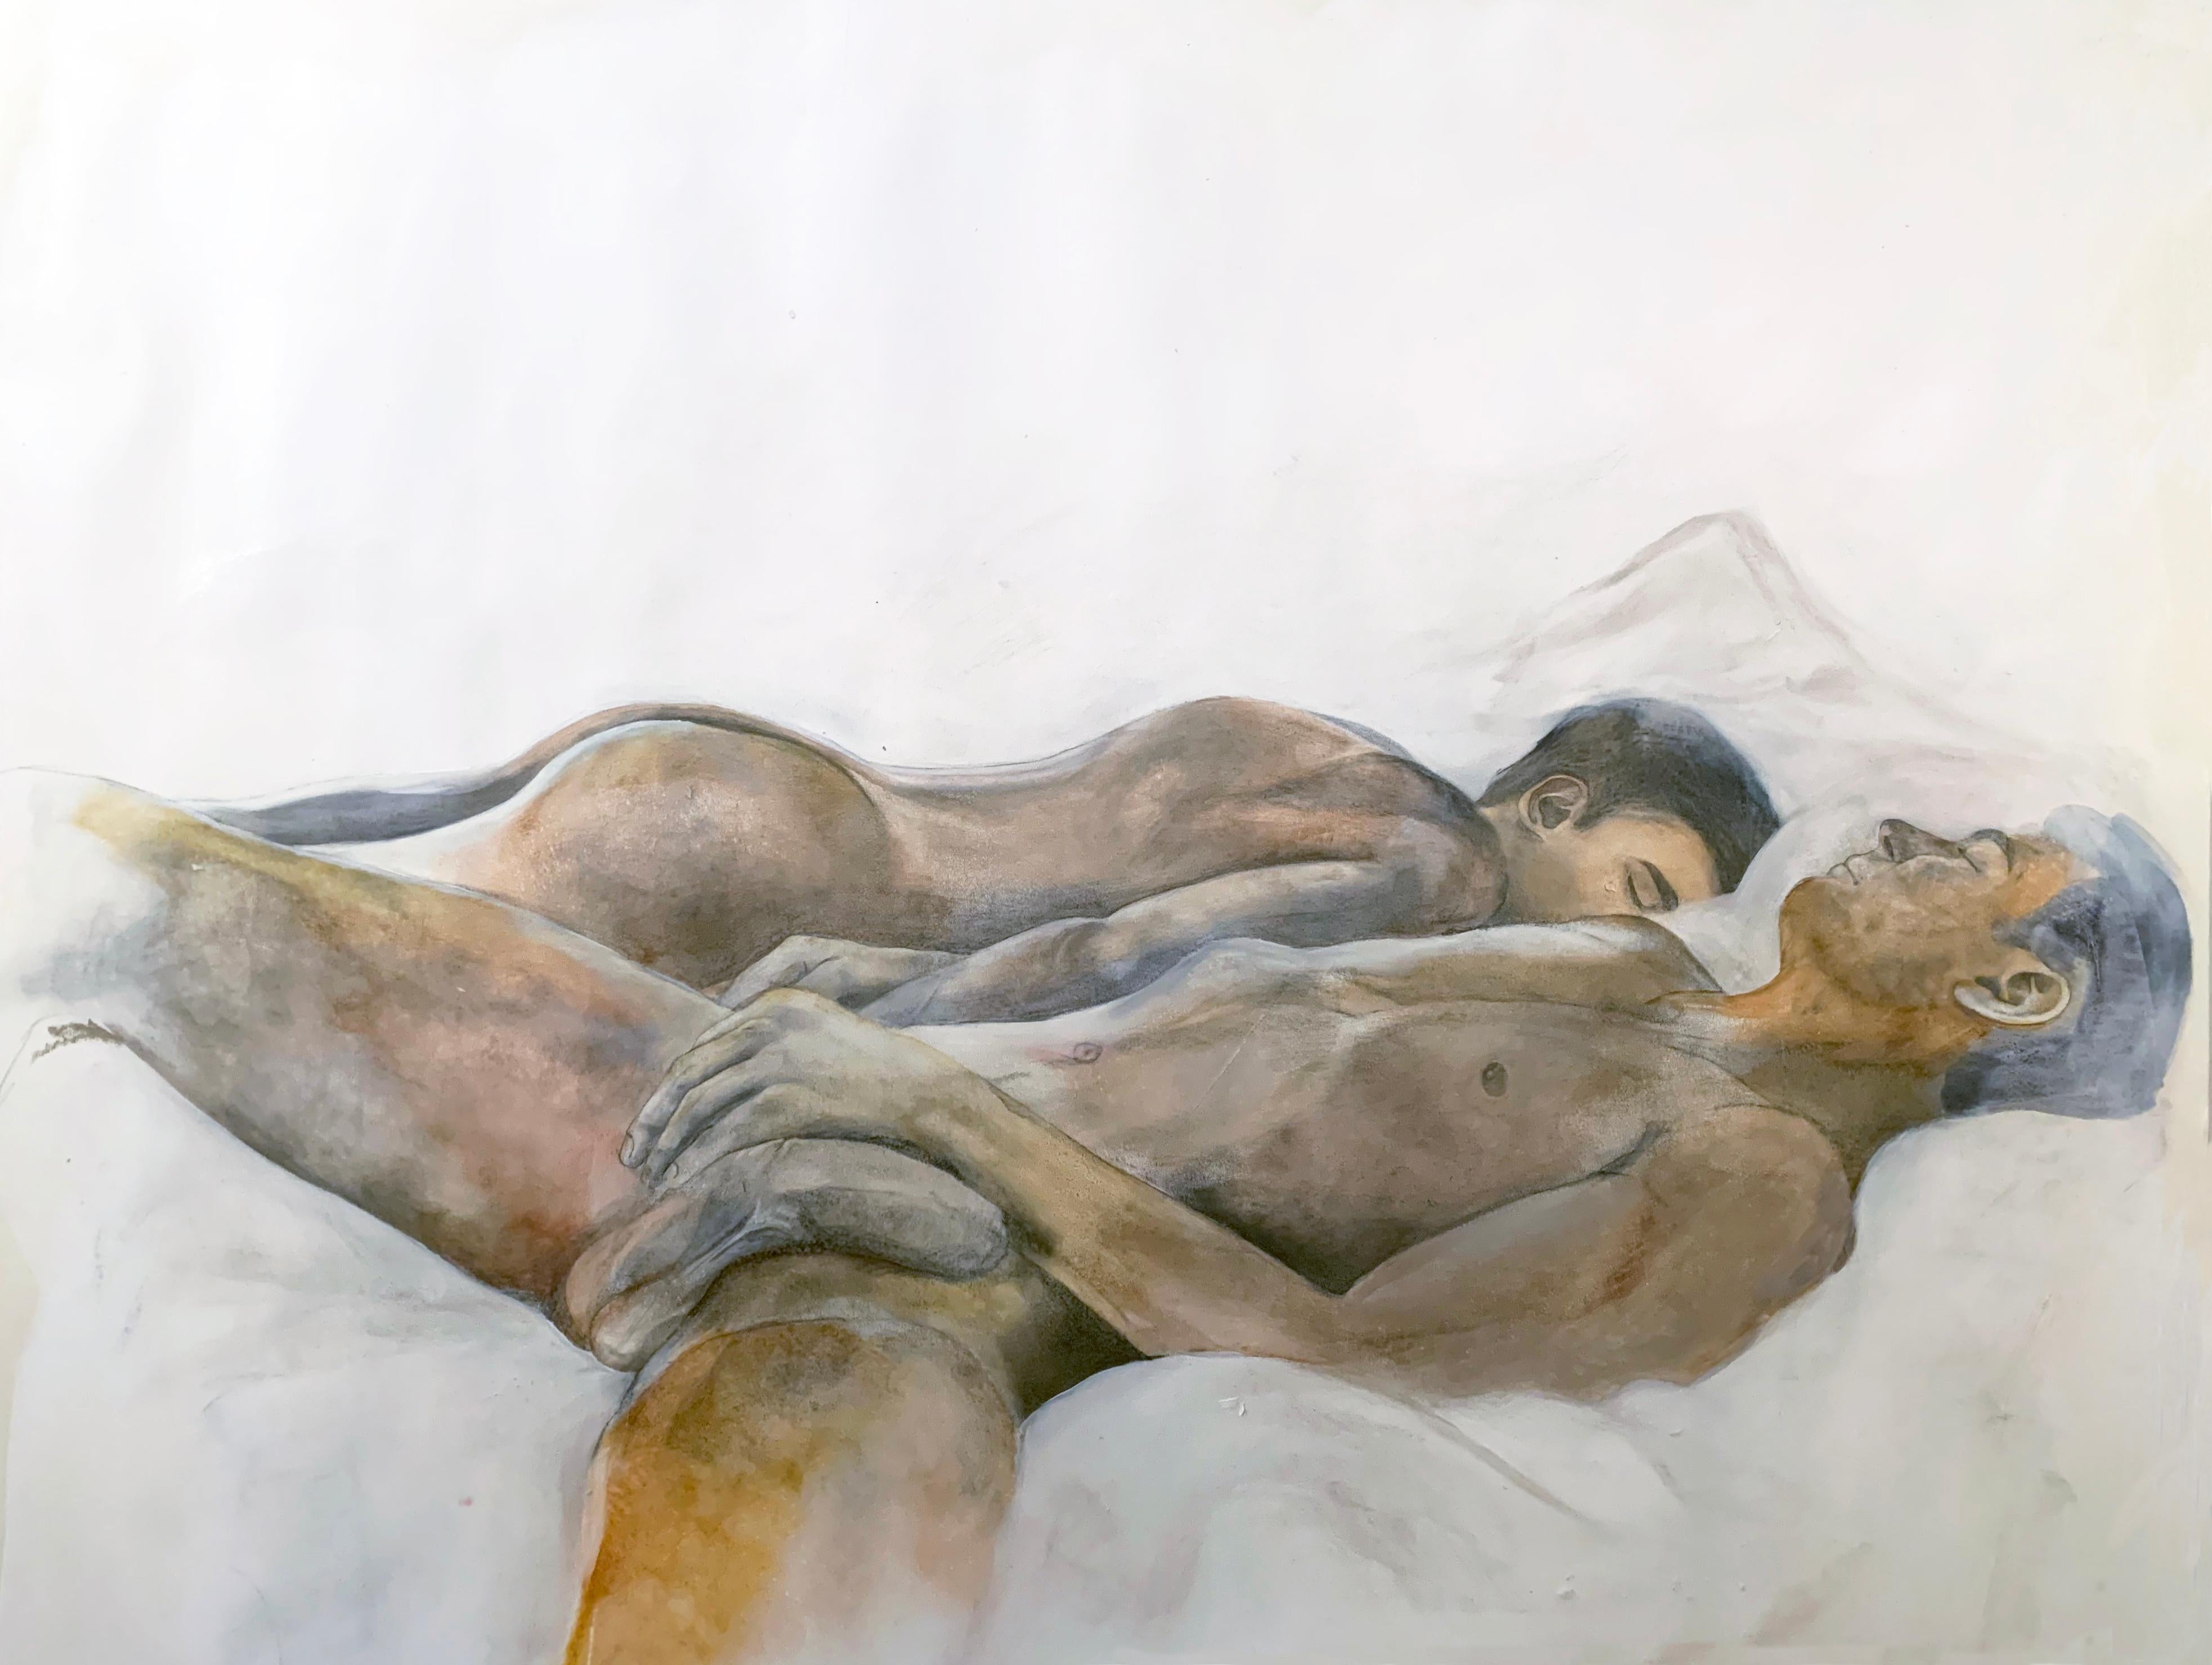 The Trip You Keep Making - Intimate Portrait of Two Reclining Males Nudes - Art by Rick Sindt